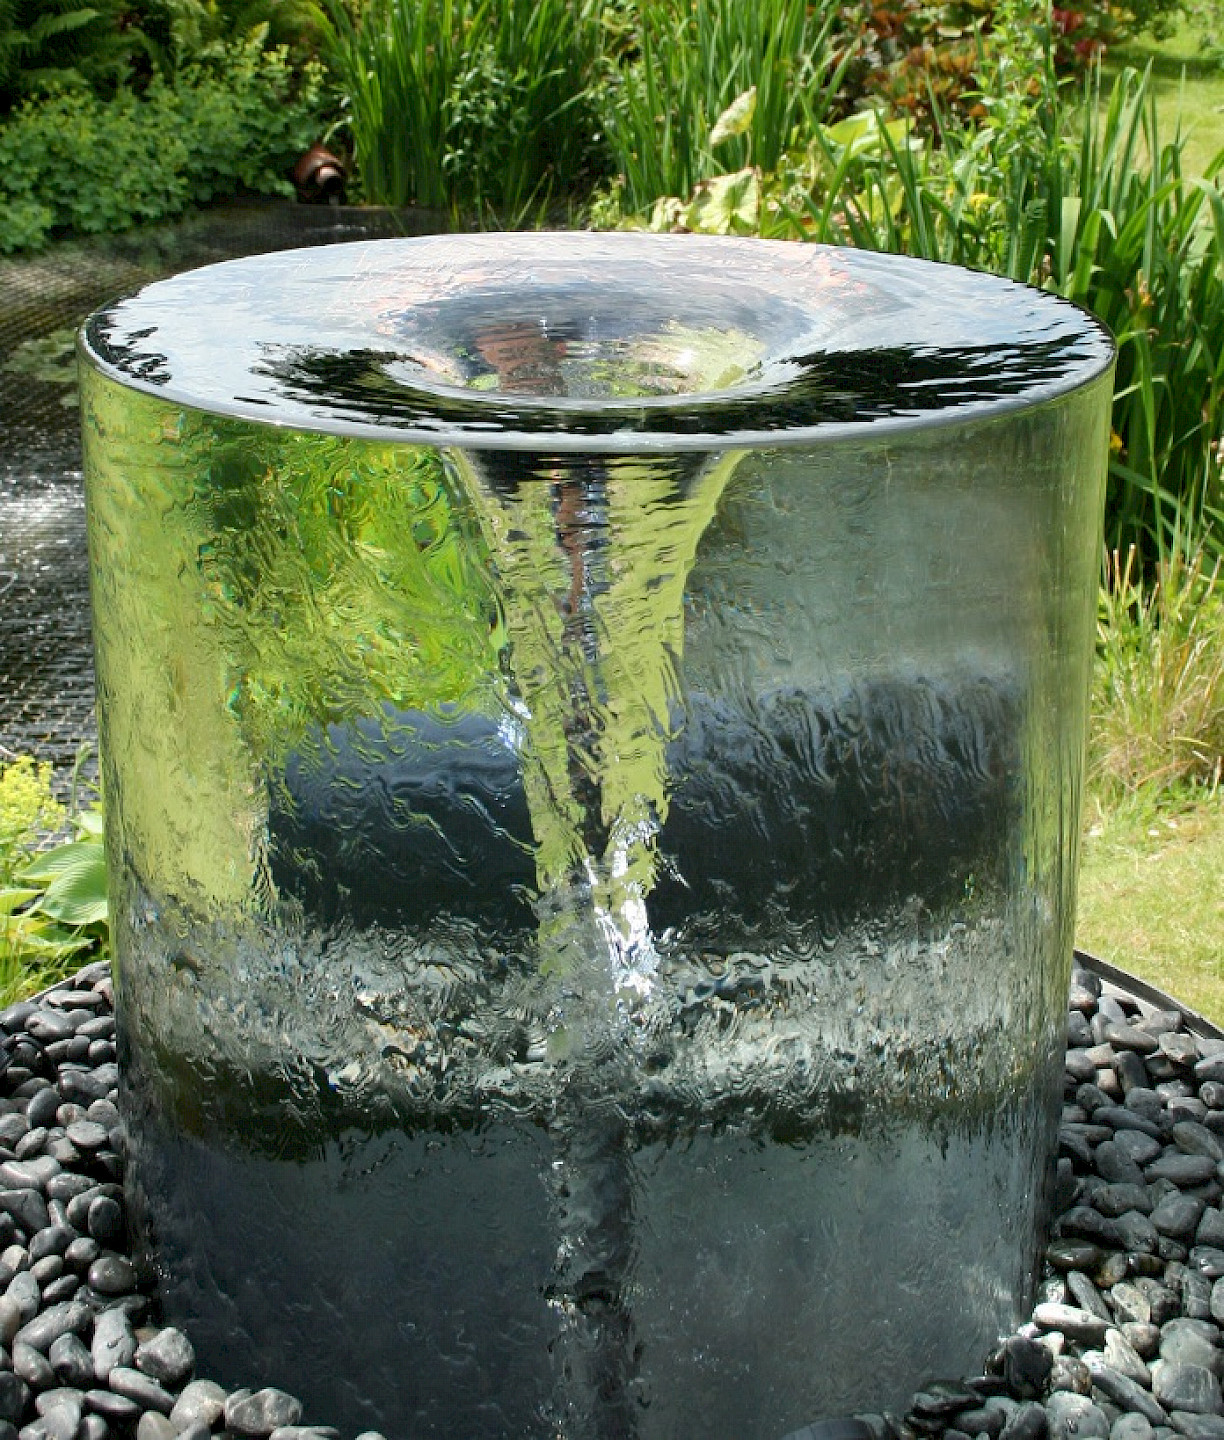 The Volute Vortex water feature - Iconic Materials